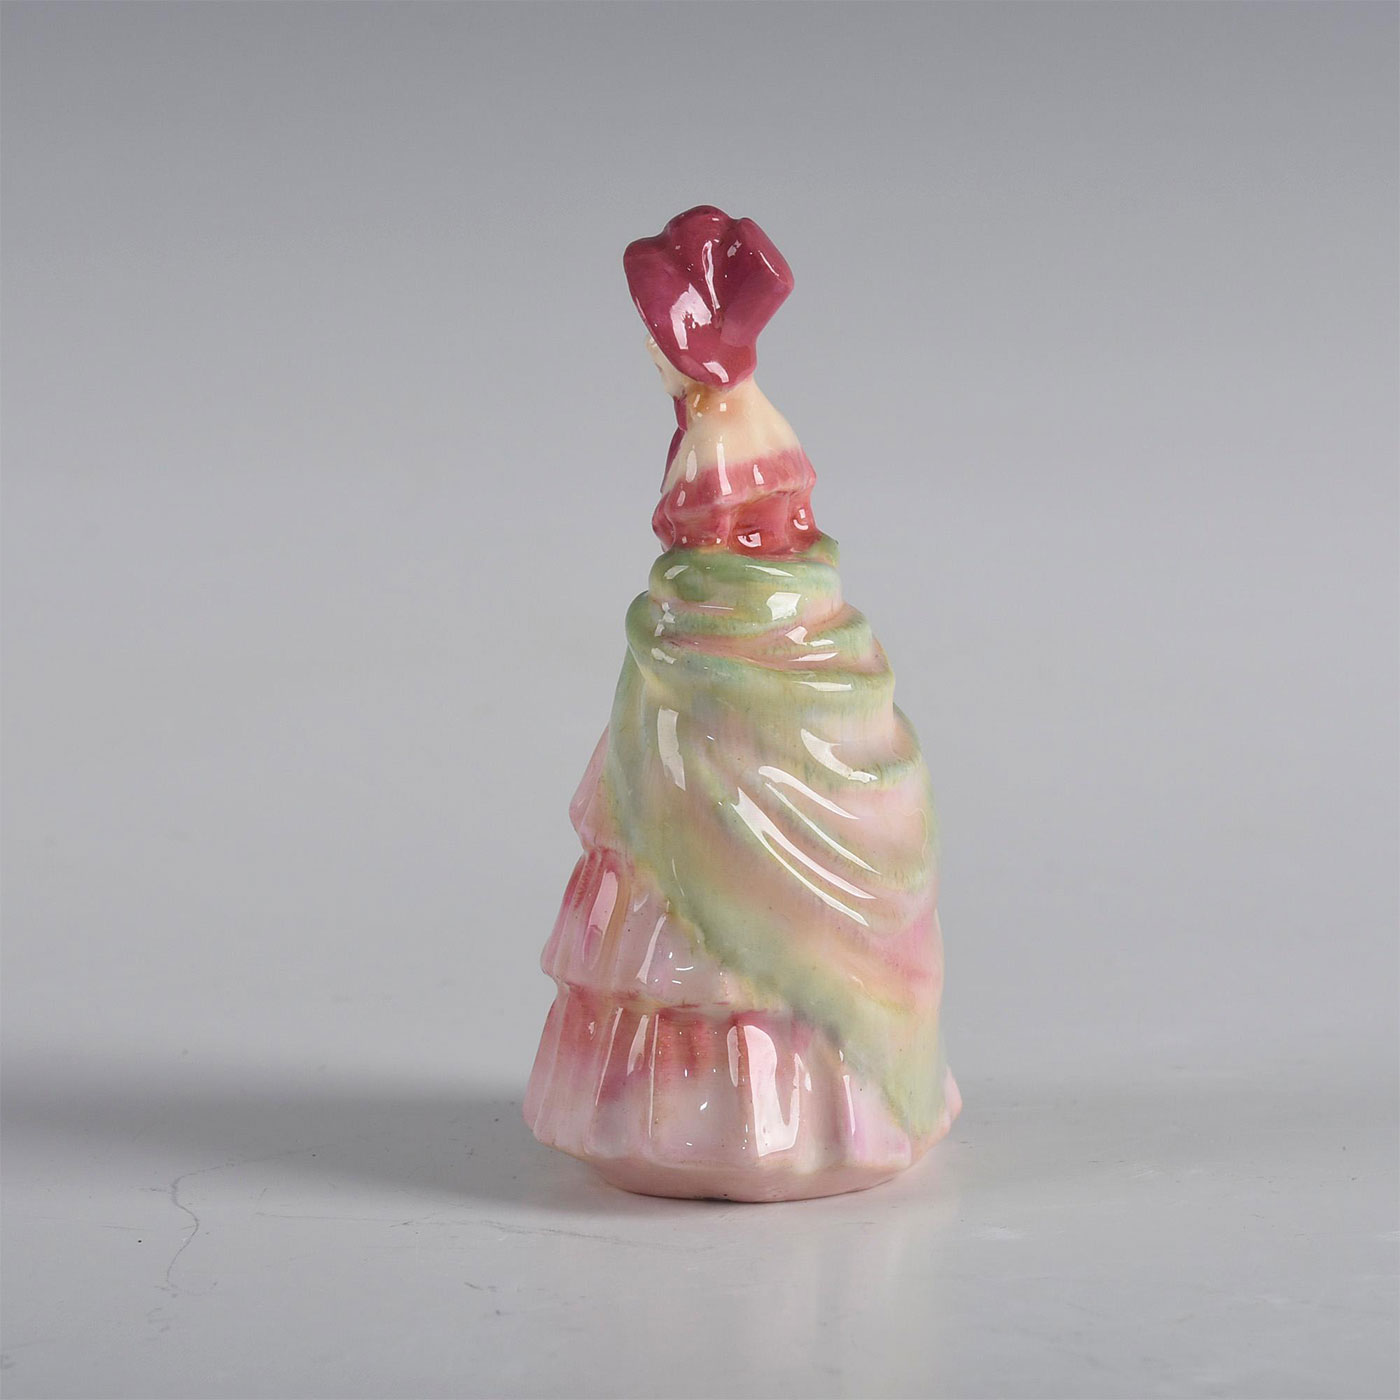 ROYAL DOULTON MINIATURE FIGURINE, VICTORIAN LADY - Image 2 of 5